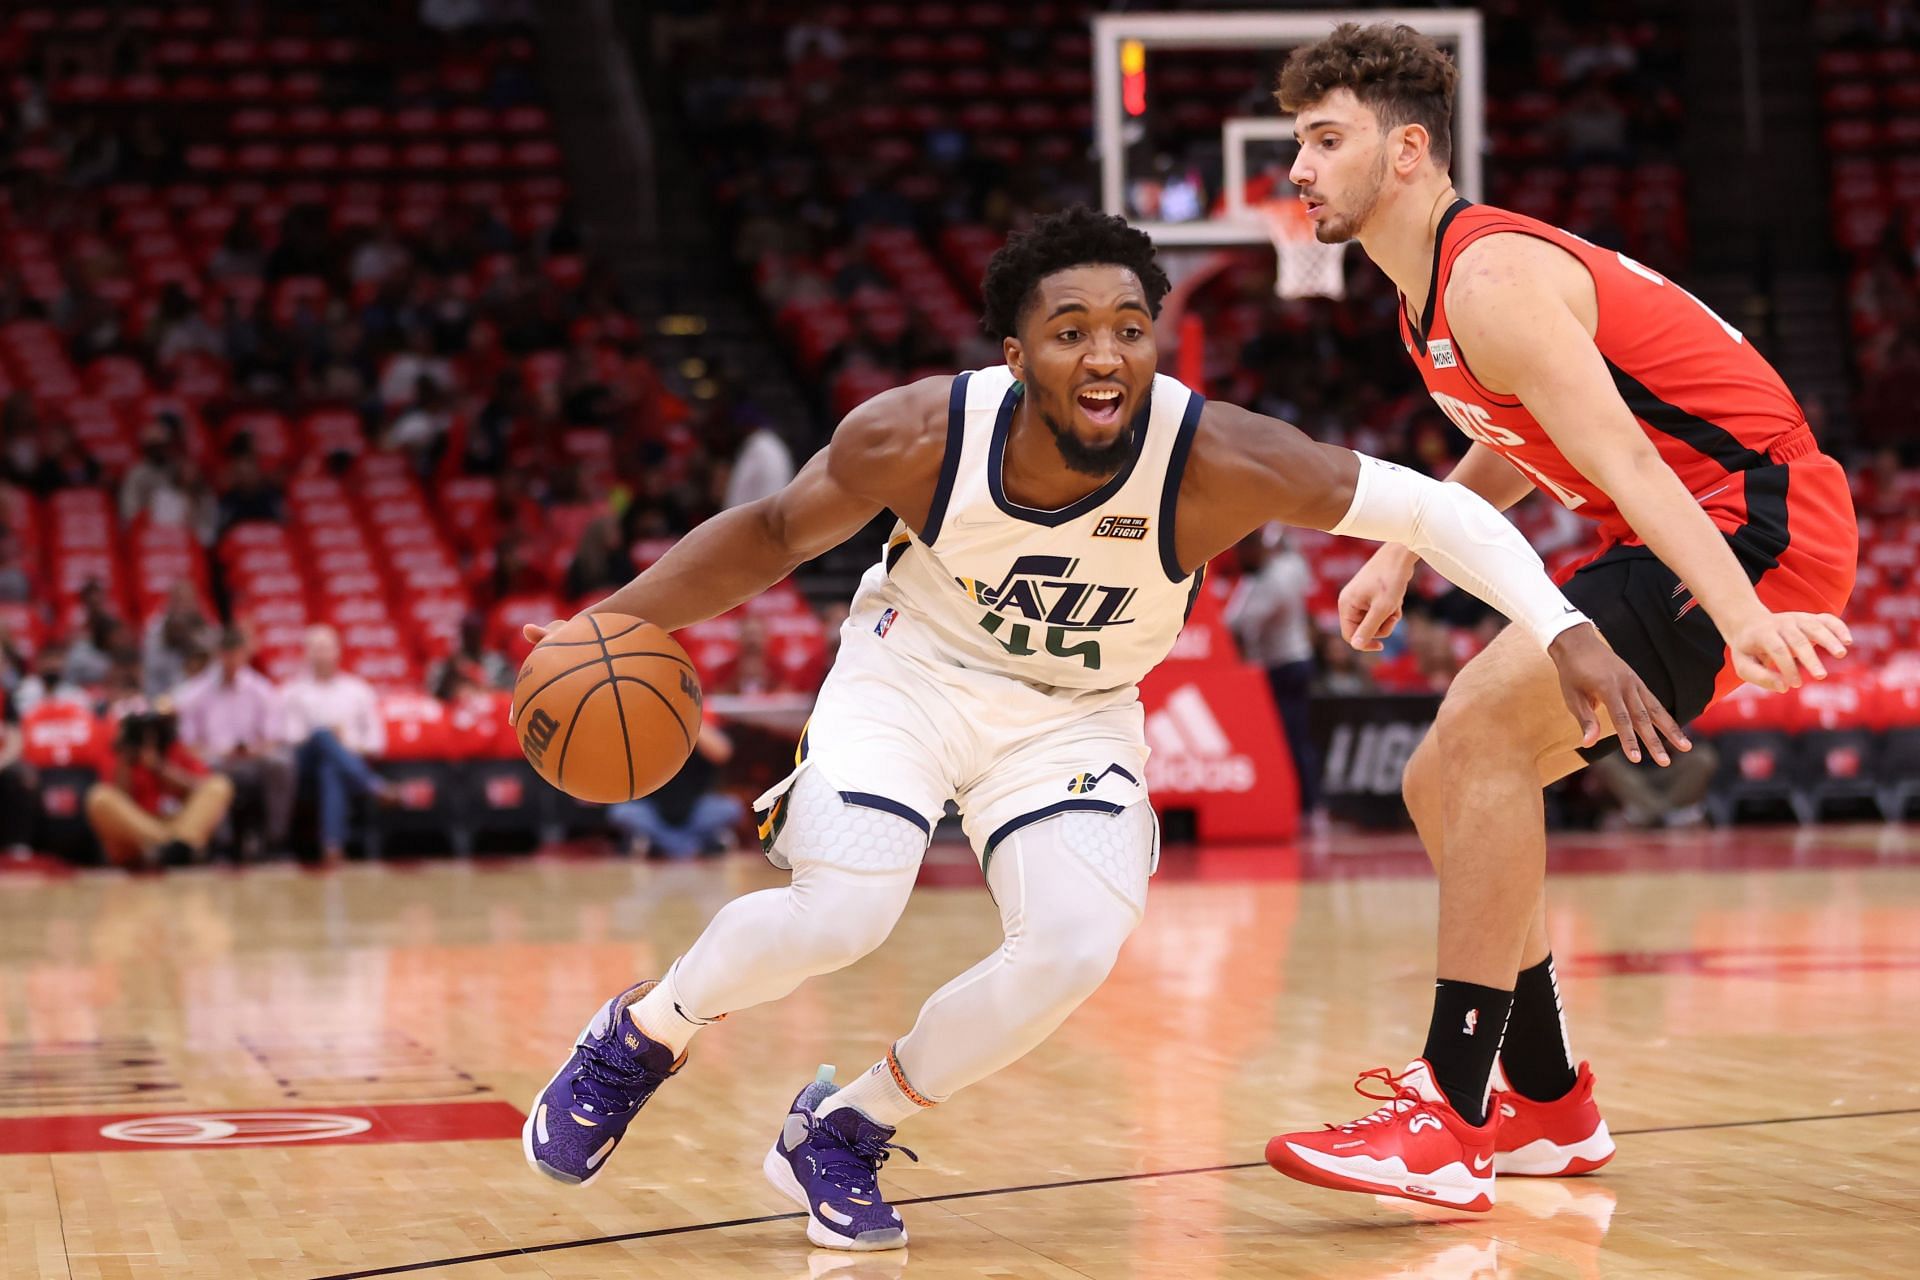 Utah Jazz star Donovan Mitchell drives to the basket against the Houston Rockets